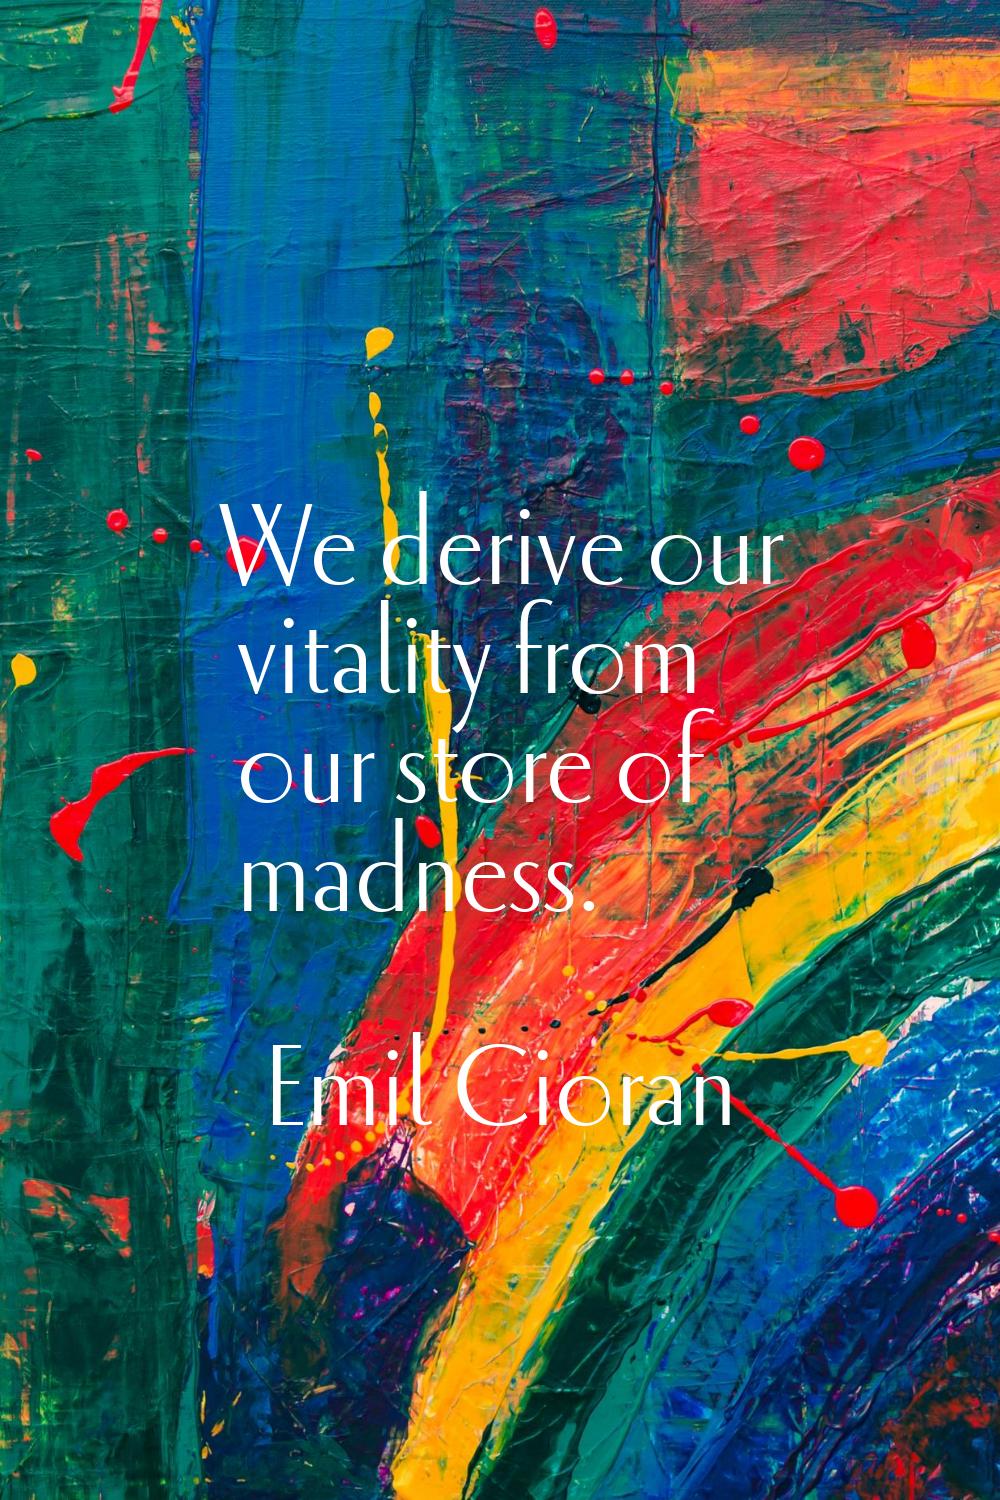 We derive our vitality from our store of madness.